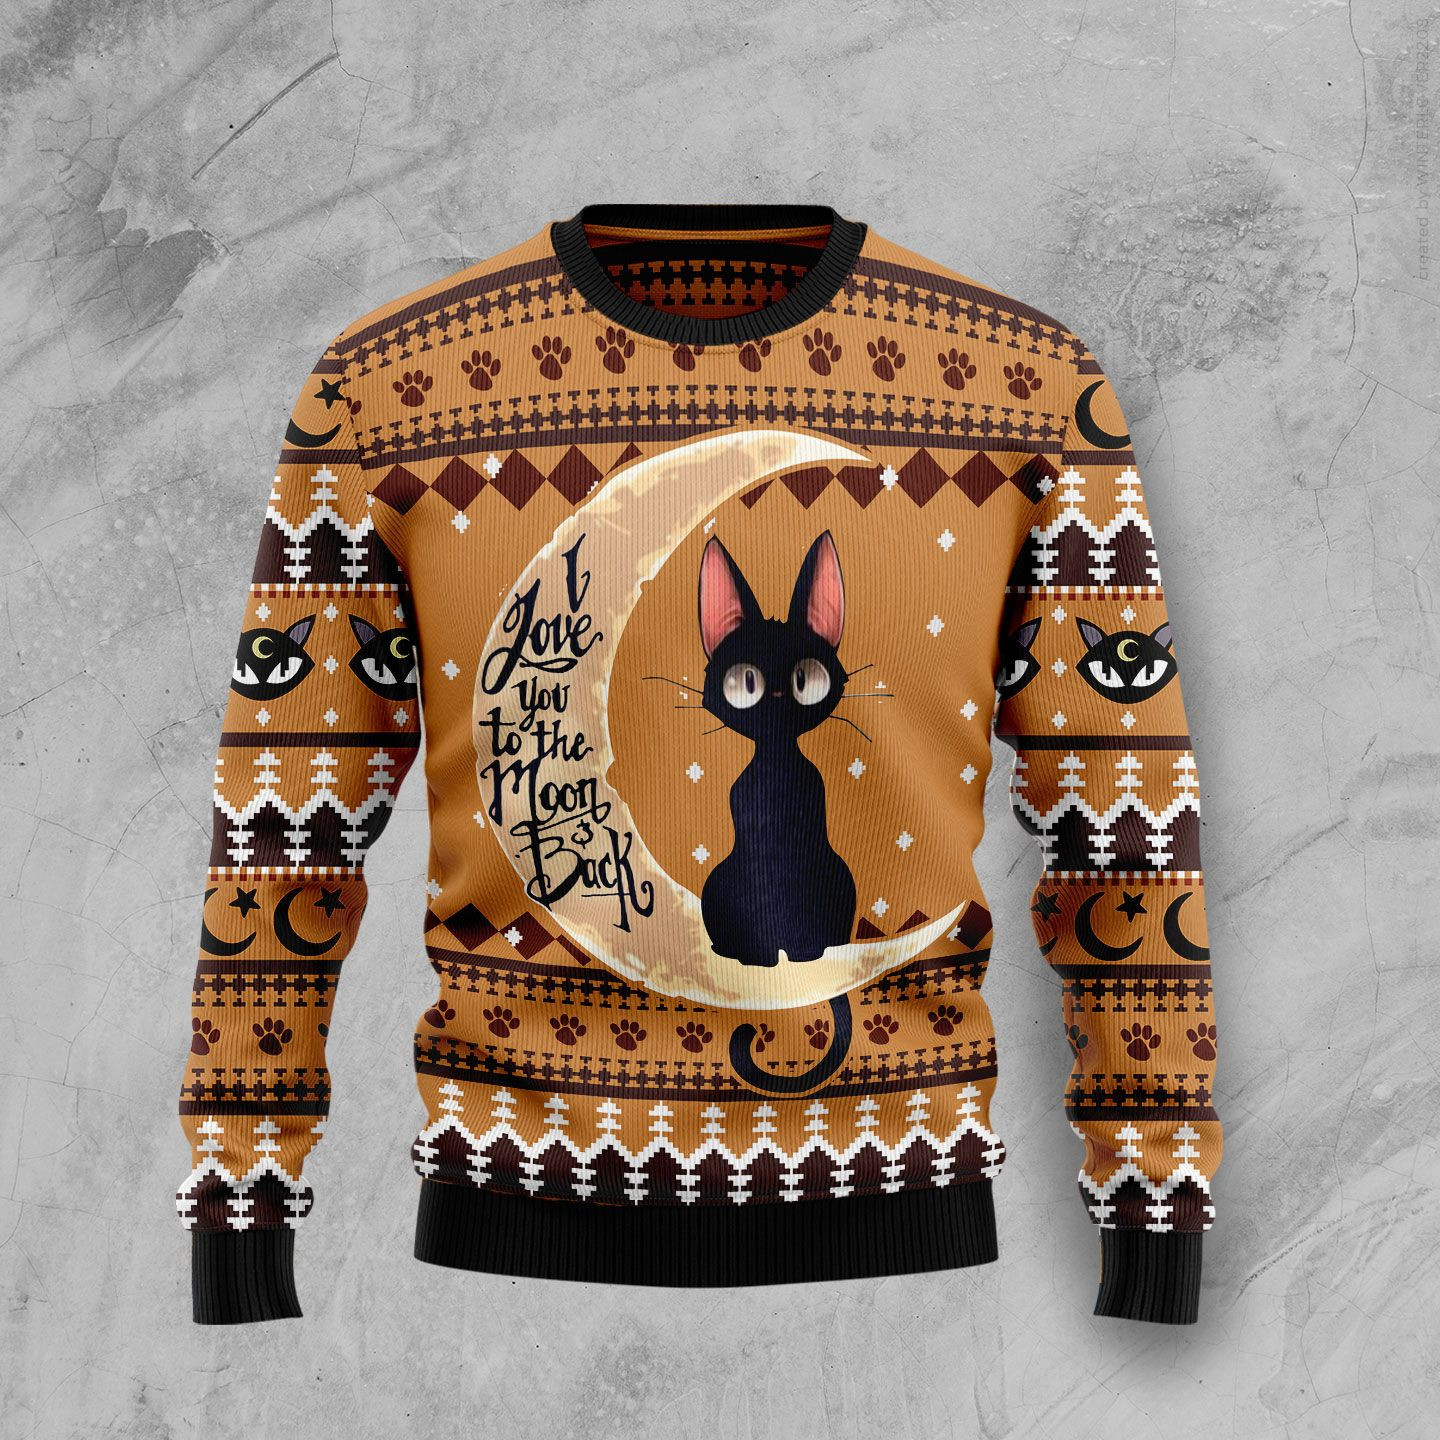 Black Cat Moon And Back Ugly Christmas Sweater Ugly Sweater For Men Women